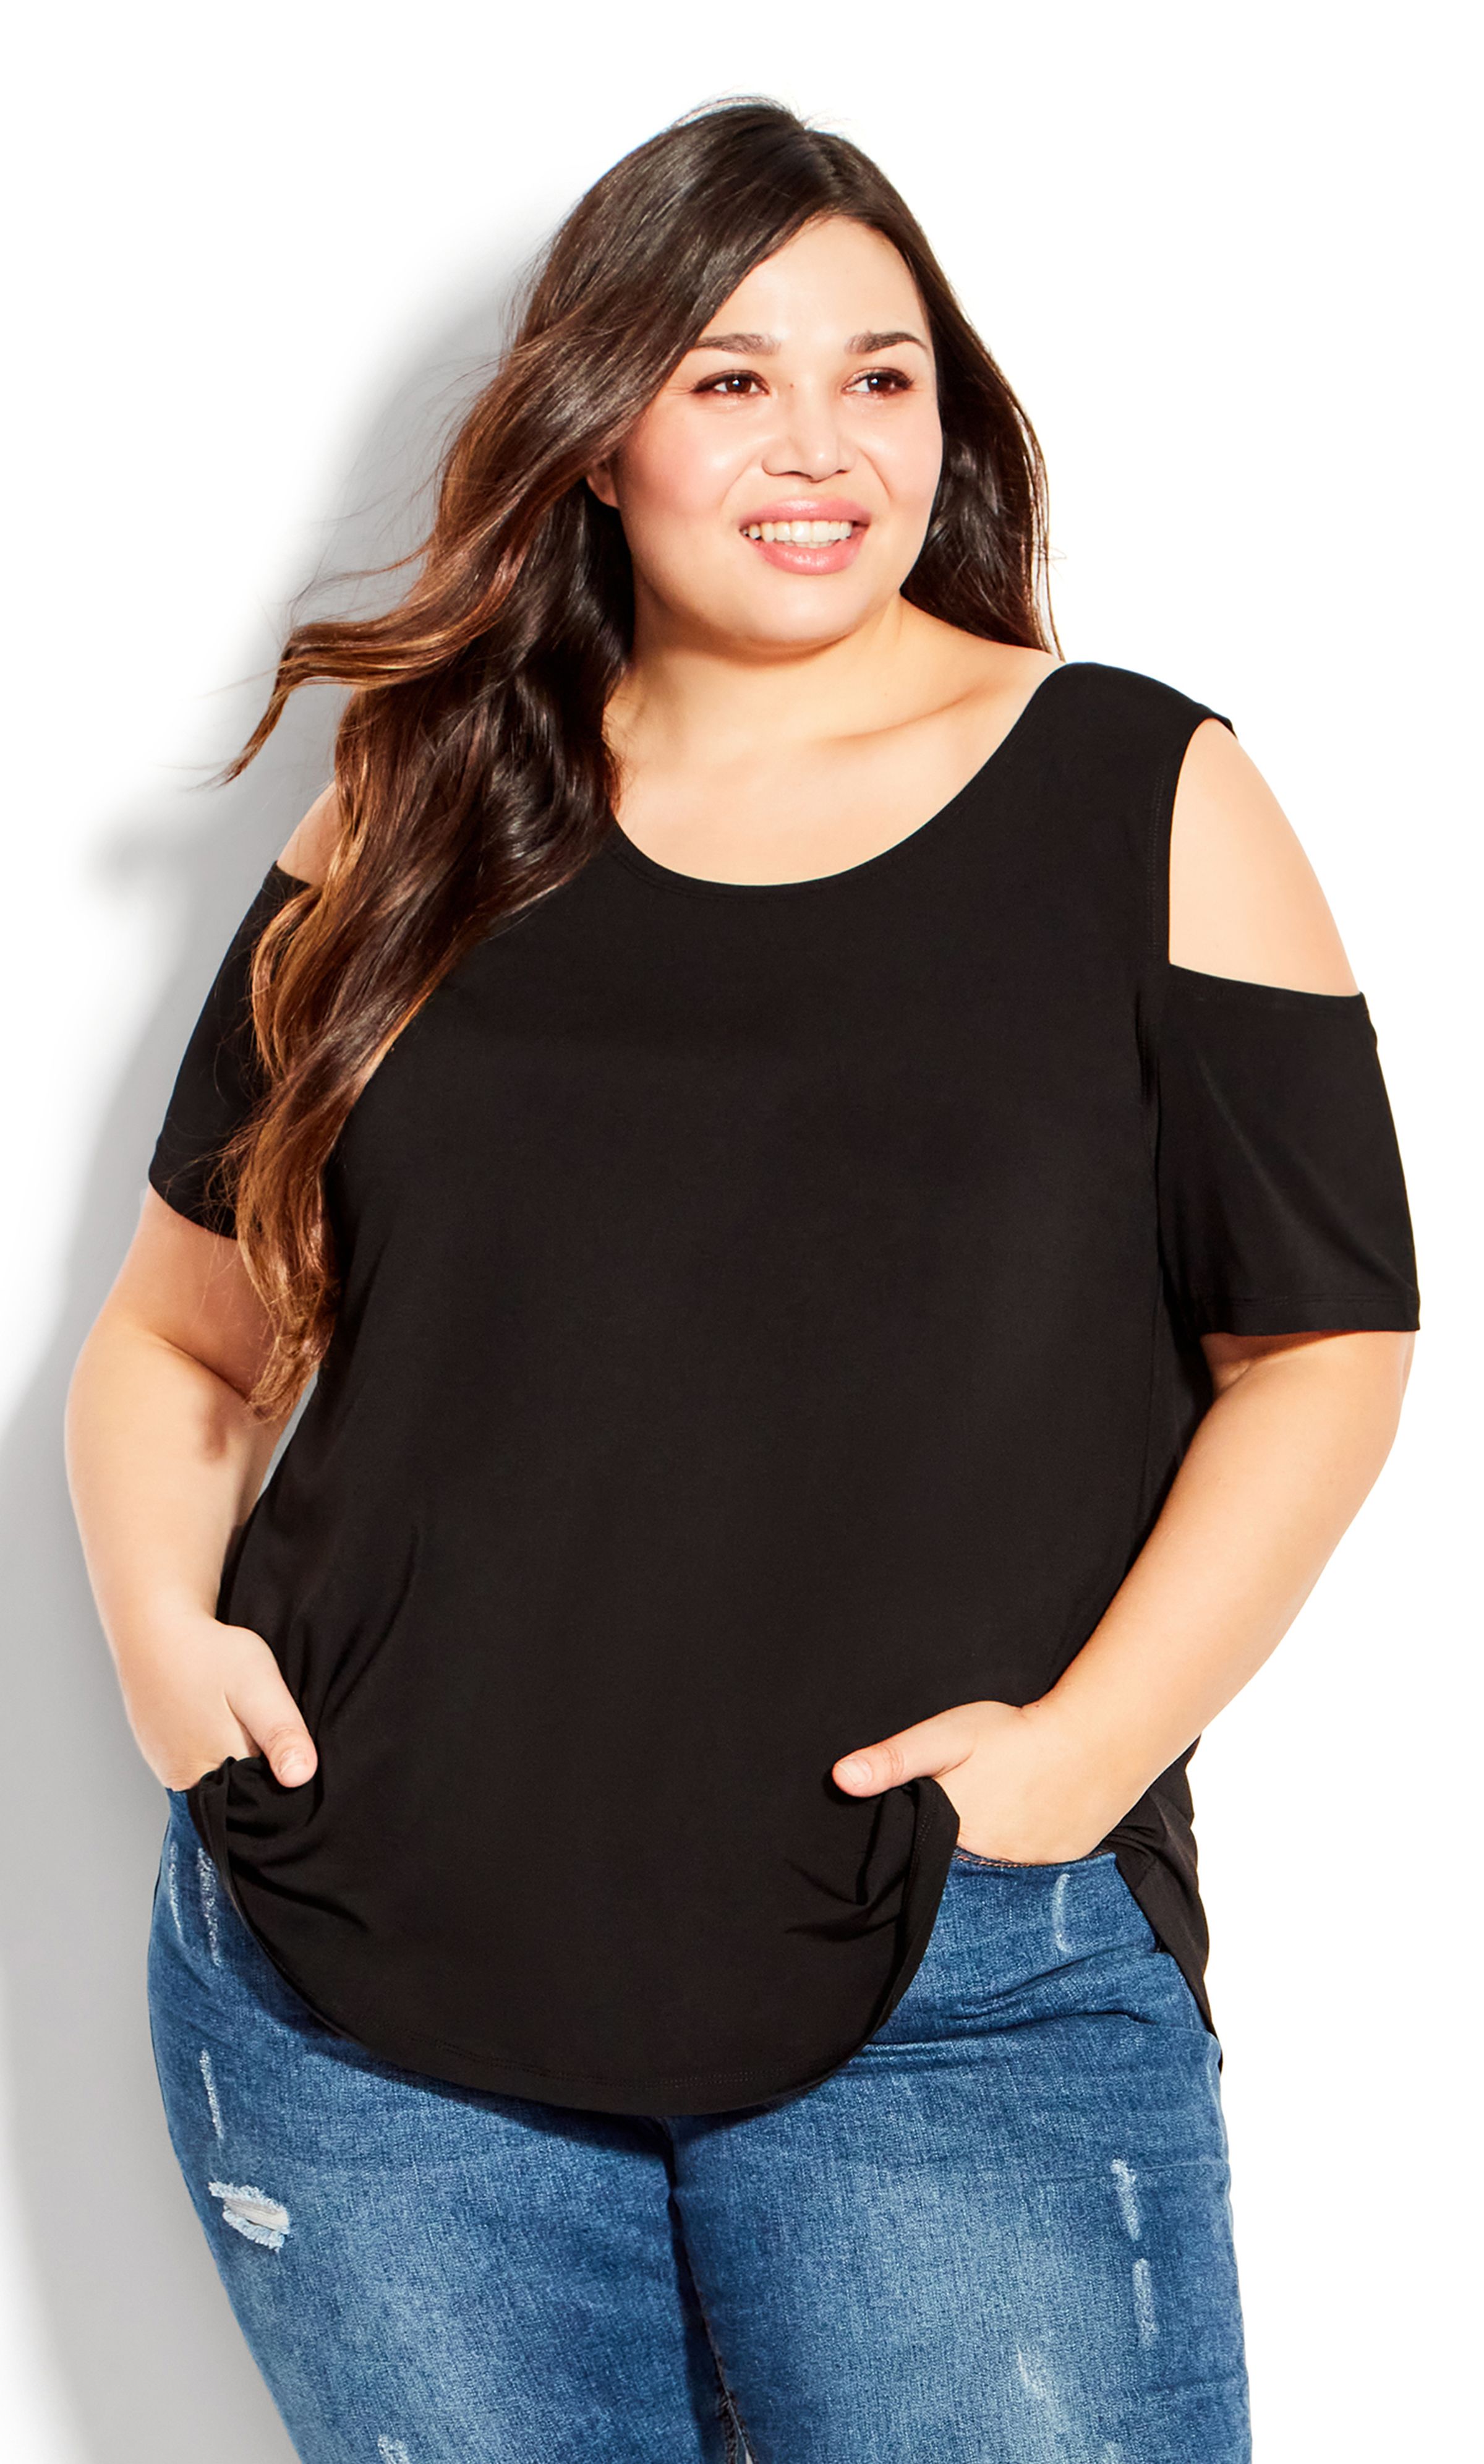 No matter where you're going, you'll be dressed to perfection in the Cold Shoulder Plain Top. This relaxed style adds a playful touch with a glimpse of shoulder and a soft stretch fabrication. A versatile black design, this top is ideal to dress up or down. Key Features Include: - Scoop neckline - Short cold shoulder sleeves - Pullover style - Darted bust for shape - Relaxed fit - Stretch fabrication - Hip length hi-lo hemline Dress up this classic top with a black skirt and a longline statement necklace.